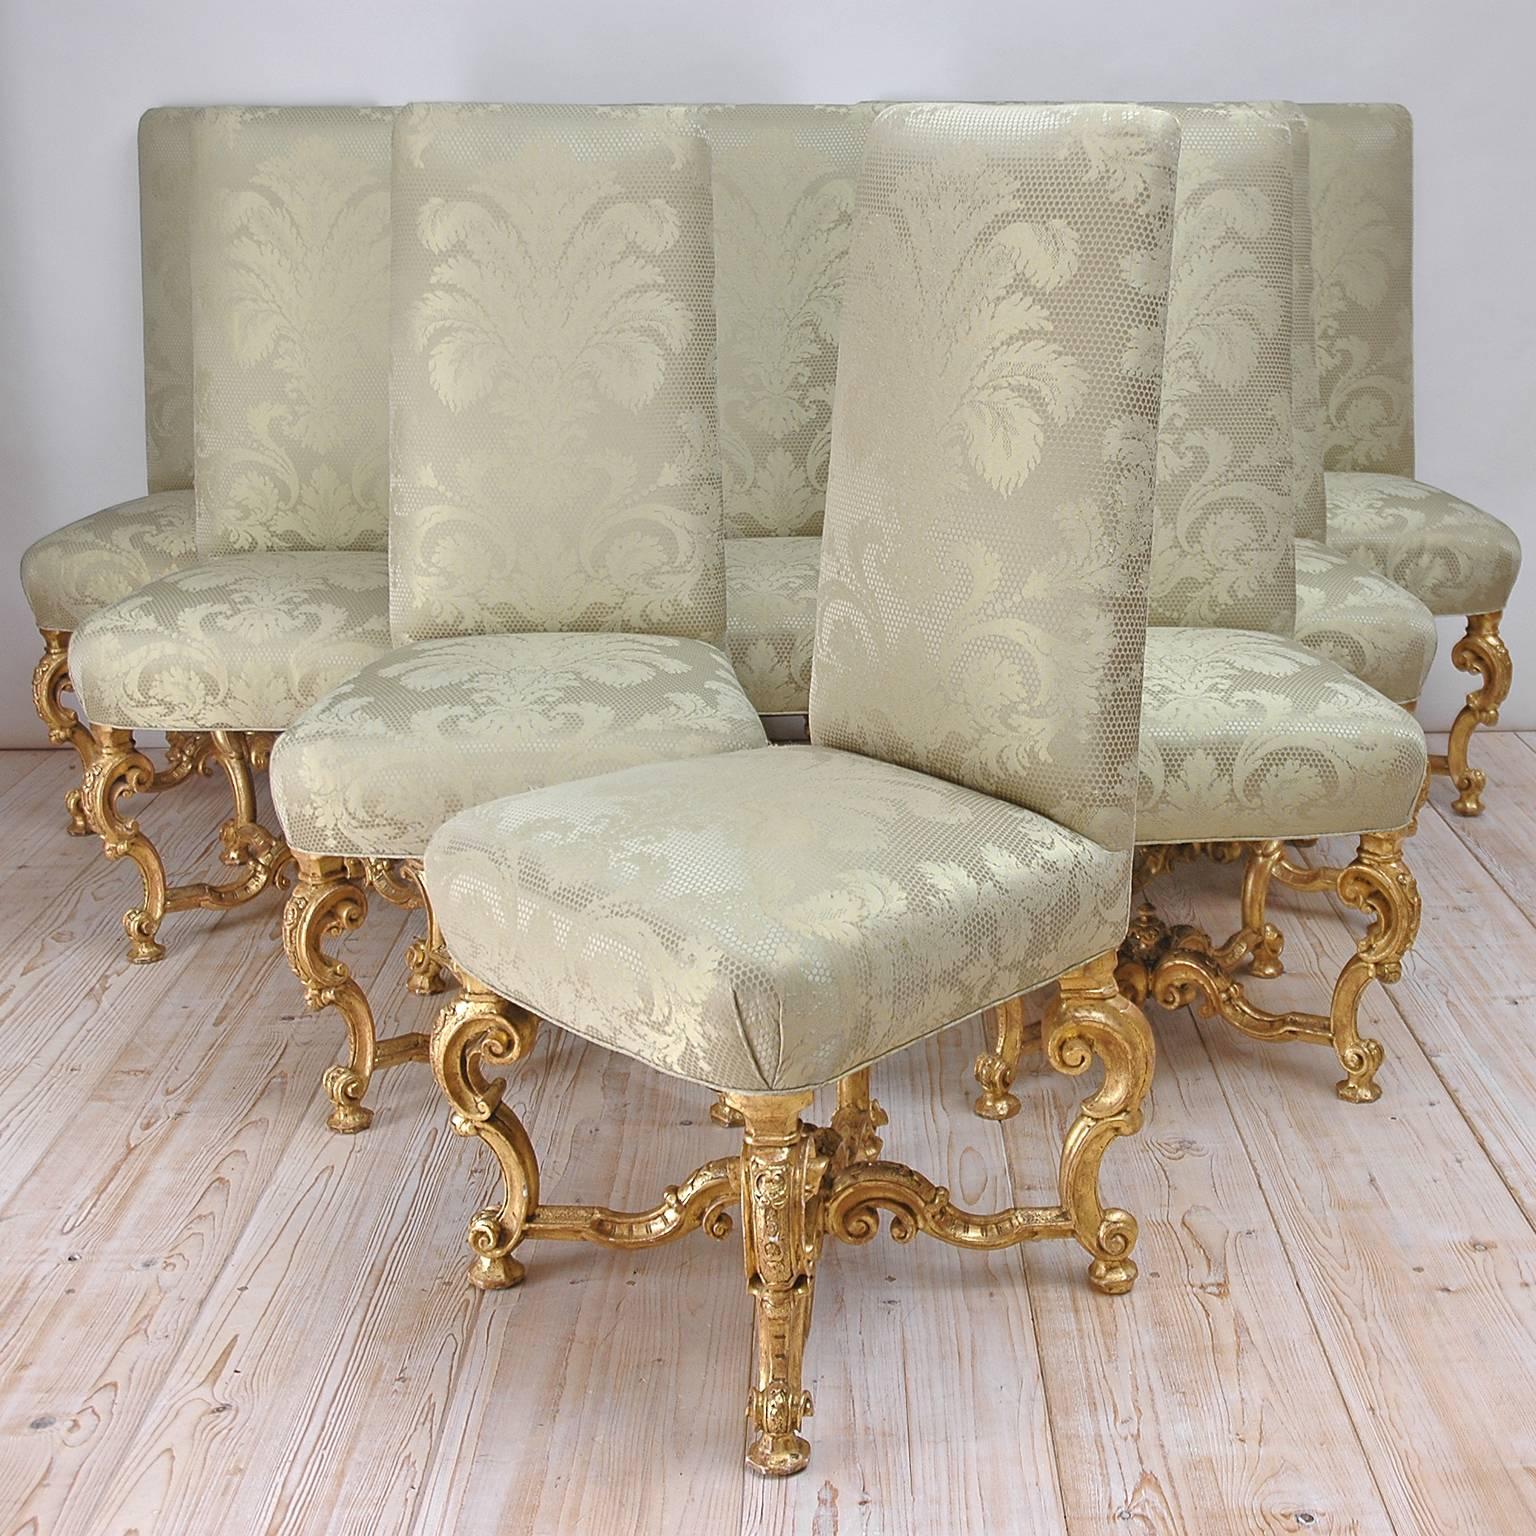 Italian Set of Ten (10) Venetian Dining Chairs in Carved and Gilded Wood with Upholstery